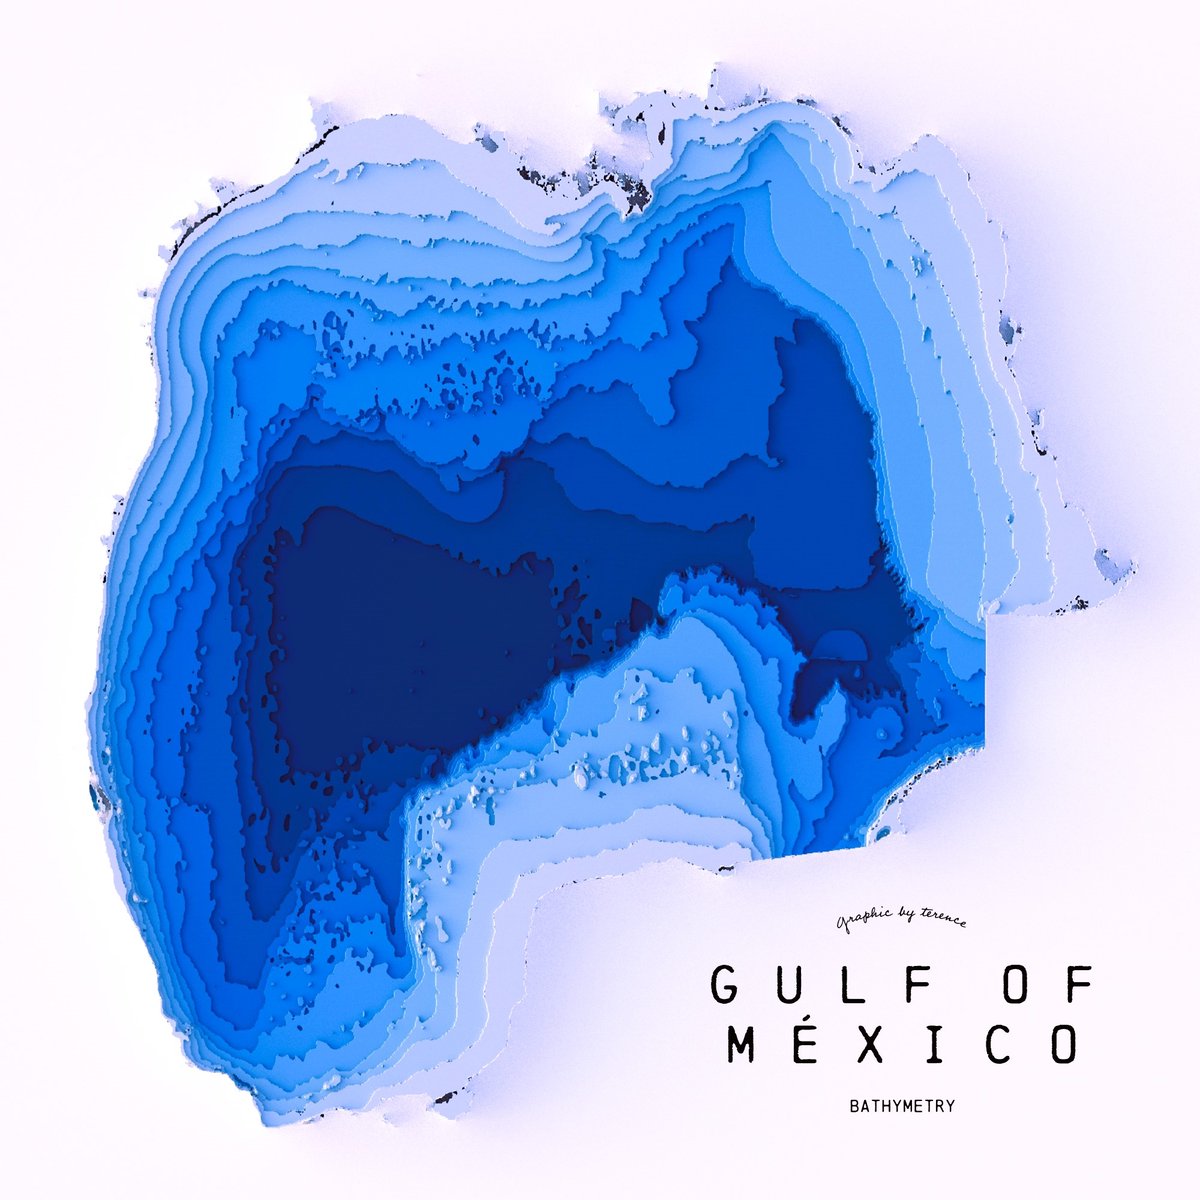 Bathymetry of the Gulf of México.

#rayshader adventures, an #rstats tale